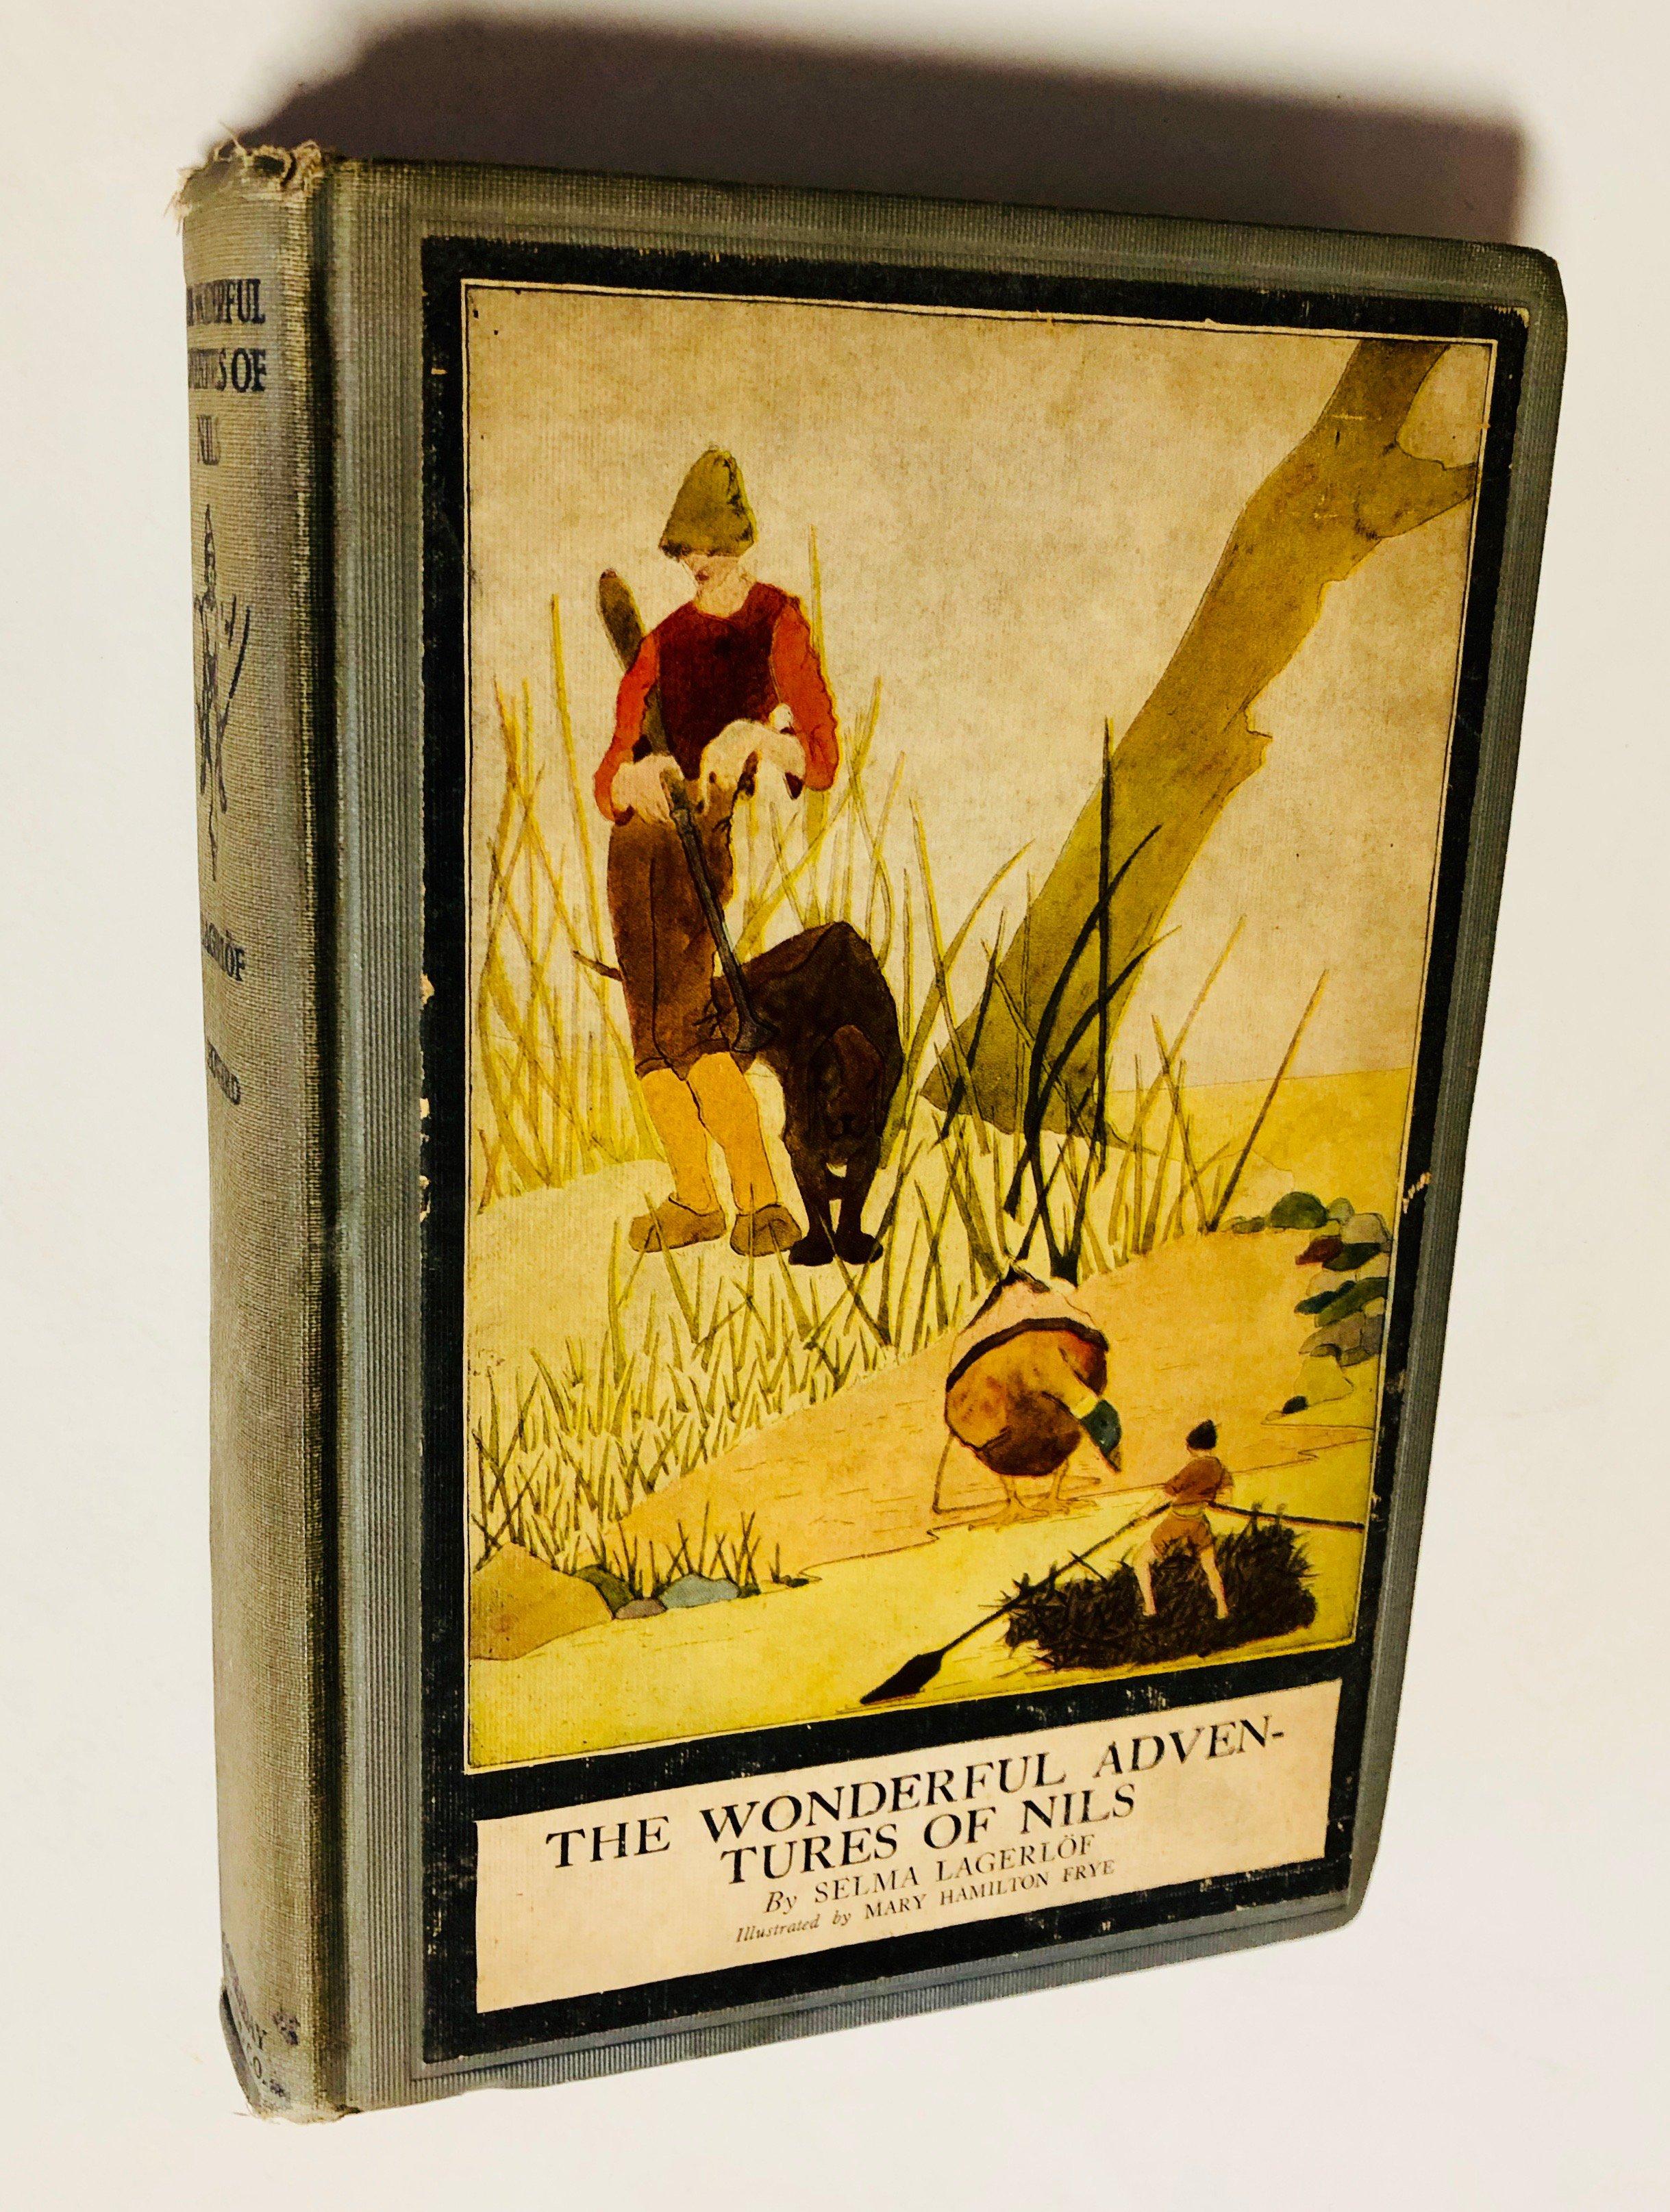 The Wonderful Adventures of Nils from the Swedish by Selma Lagerlof (1922)